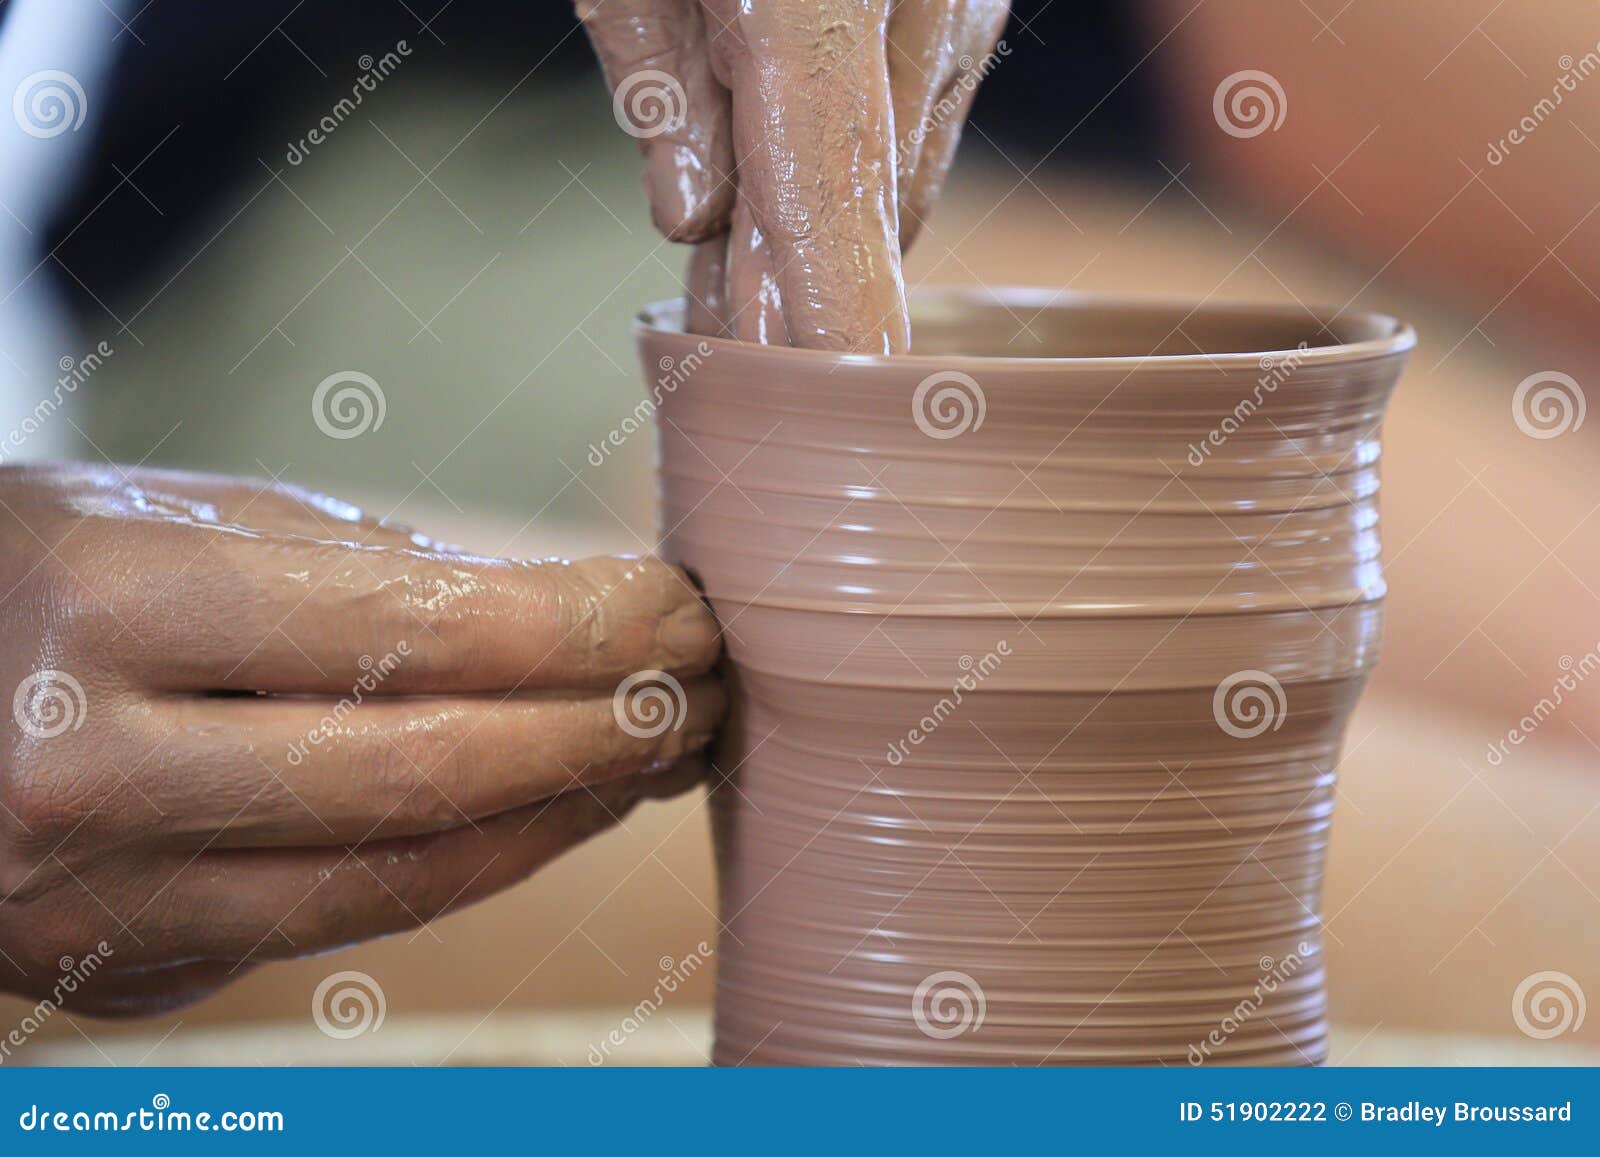 throwing/making pottery